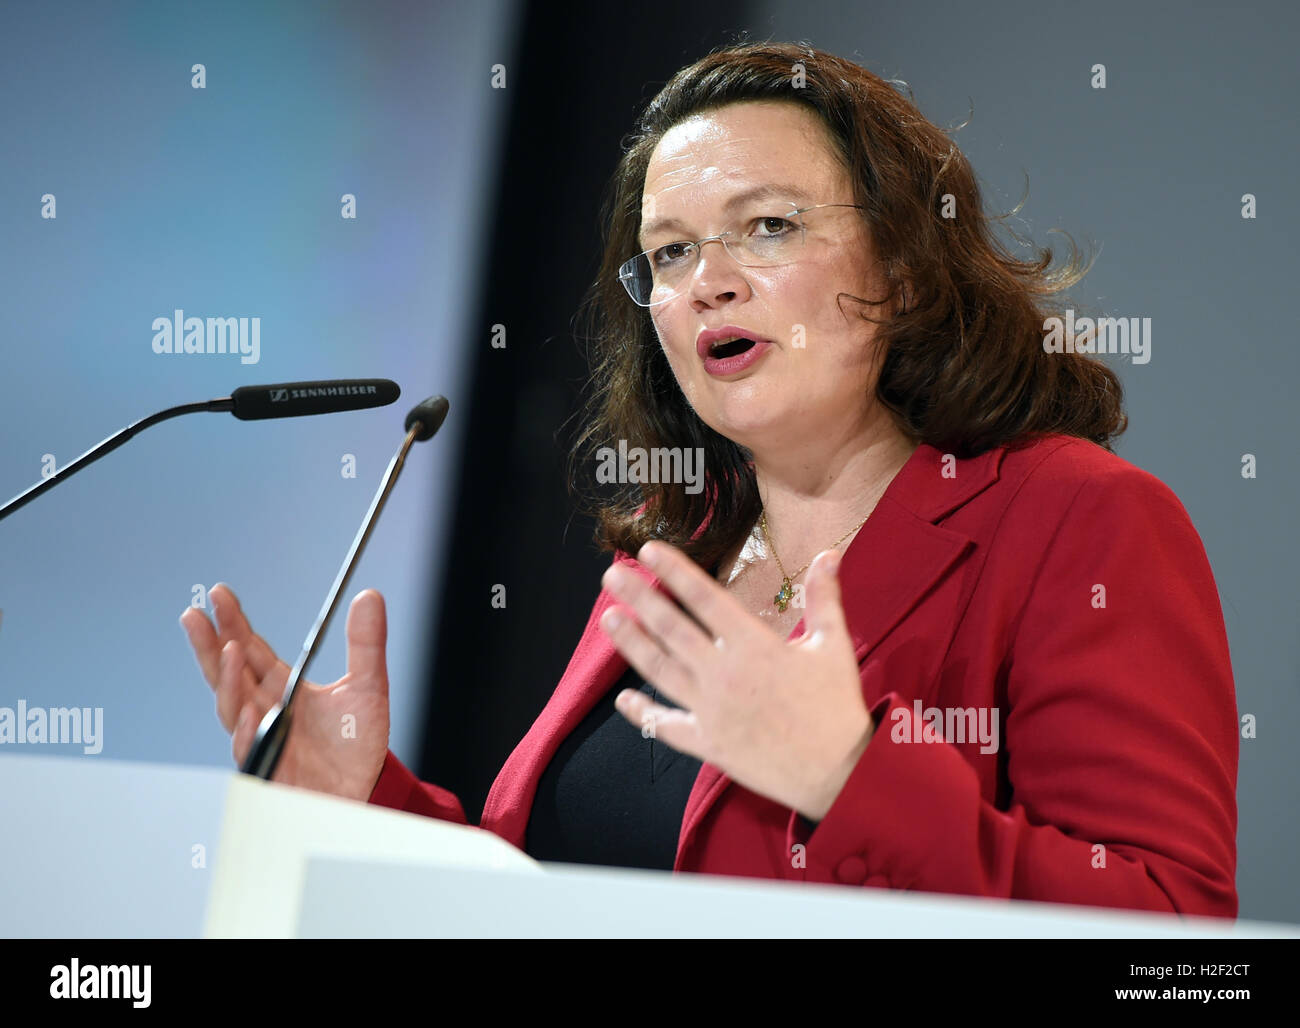 Berlin, Germany. 28th Oct, 2016. German Minister of Labour Andrea Nahles (SPD) speaking at the Social State Congress of the IG Metall union in Berlin, Germany, 28 October 2016. Nahles announced a draft of a bill for better part-time job conditions for this November. PHOTO: BRITTA PEDERSEN/dpa/Alamy Live News Stock Photo